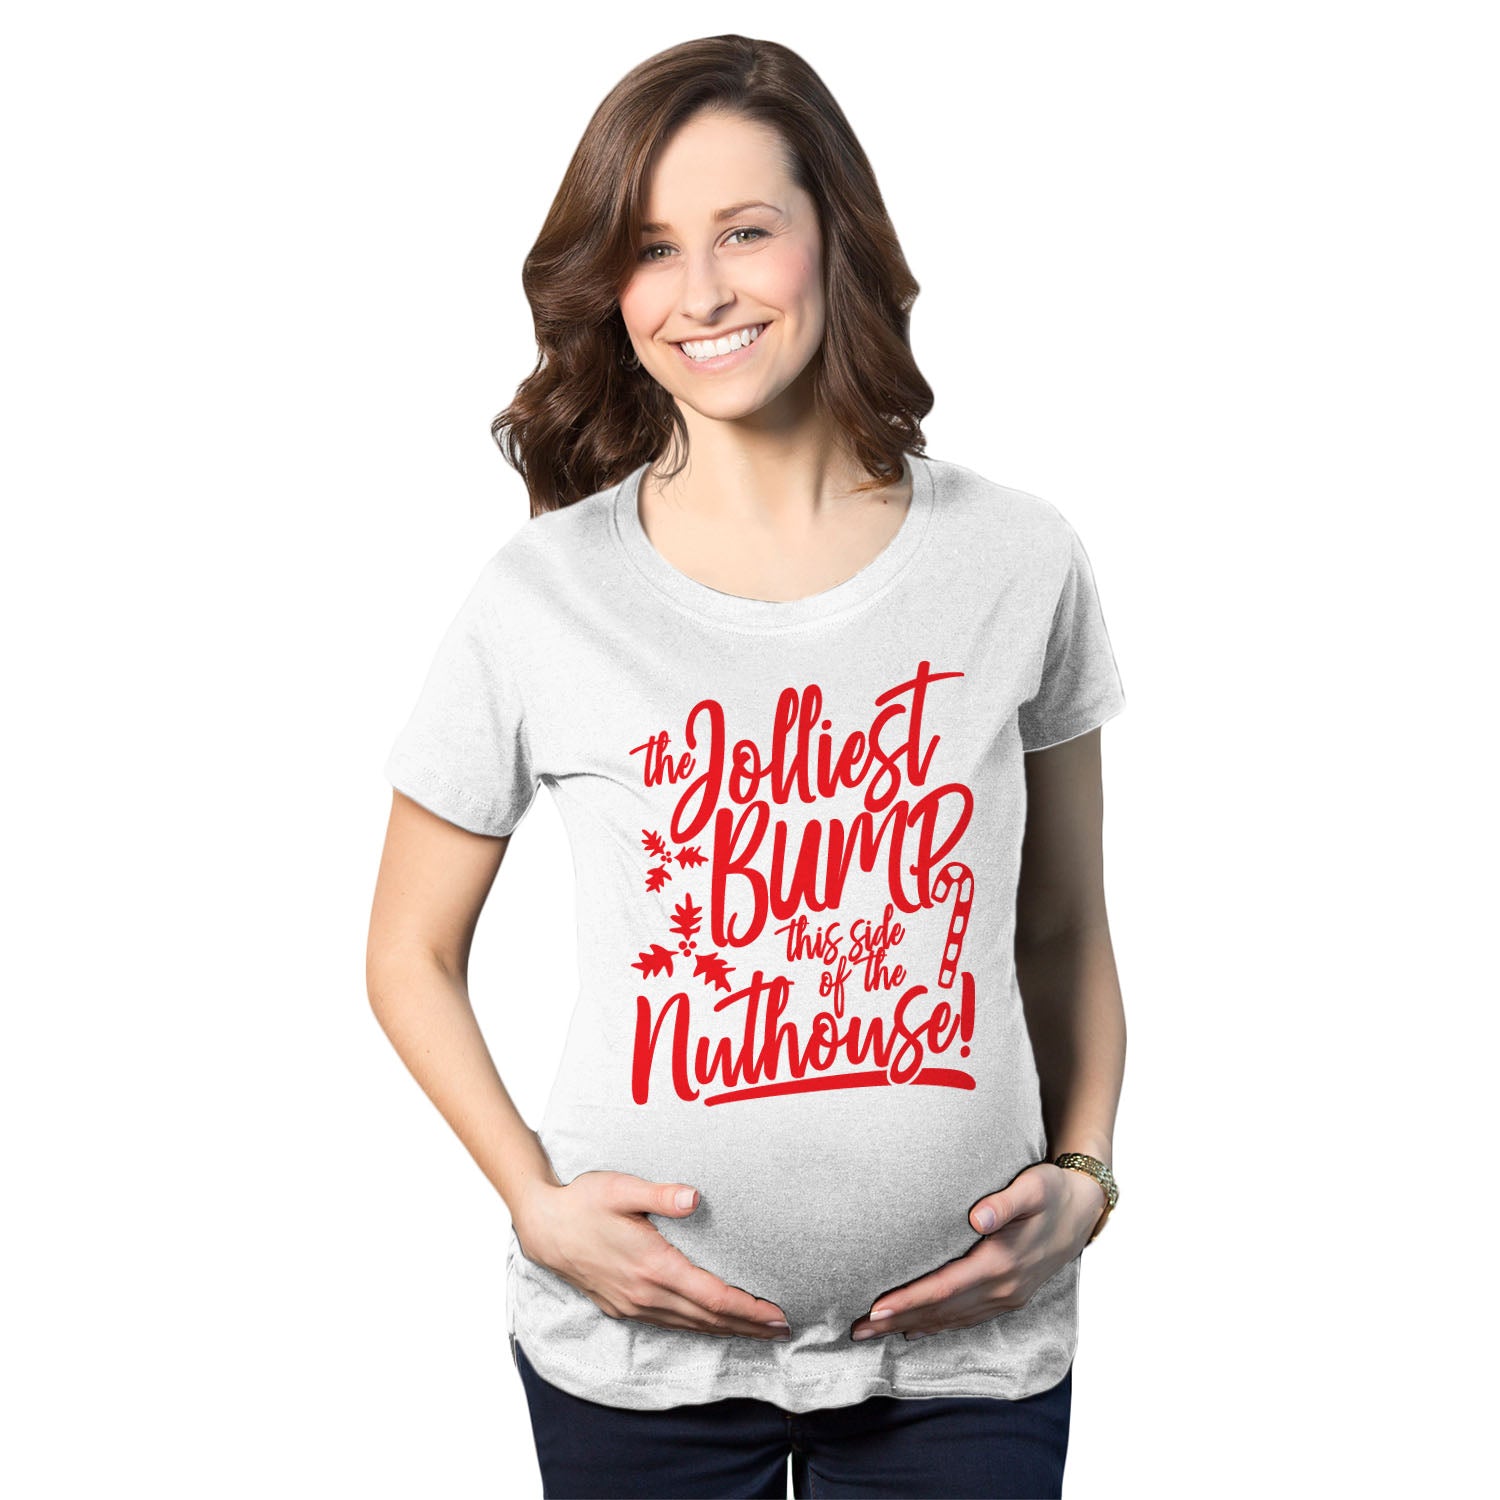 Funny White The Jolliest Bump This Side Of The Nuthouse Maternity T Shirt Nerdy Christmas TV & Movies Tee